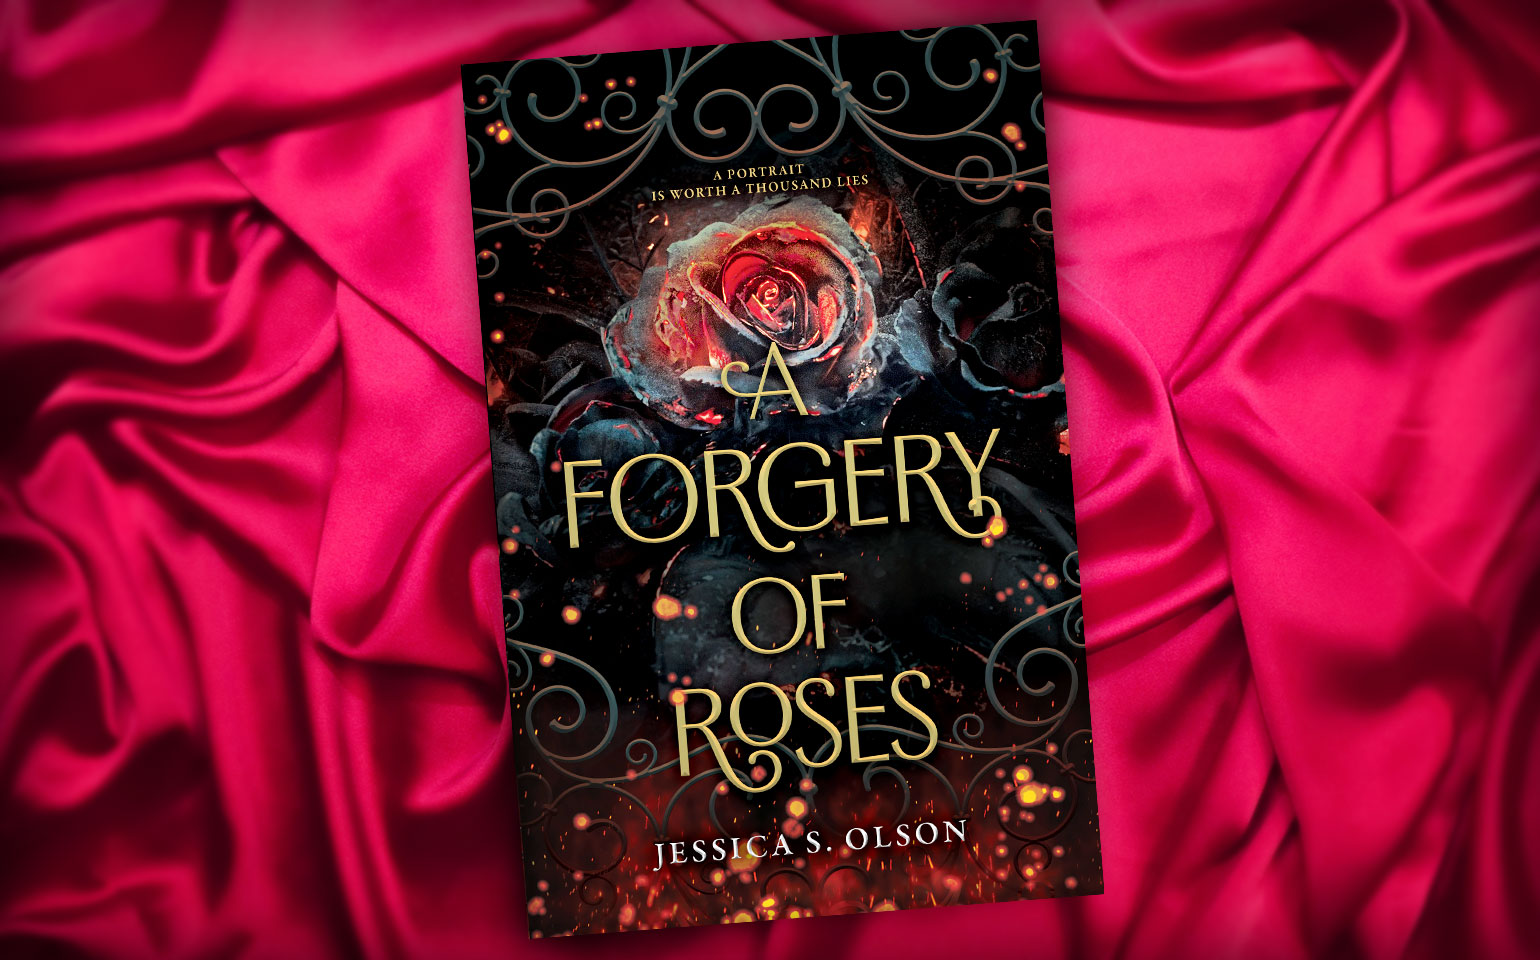 The cover of Jessica S. Olson's A Forgery of Roses is shown.